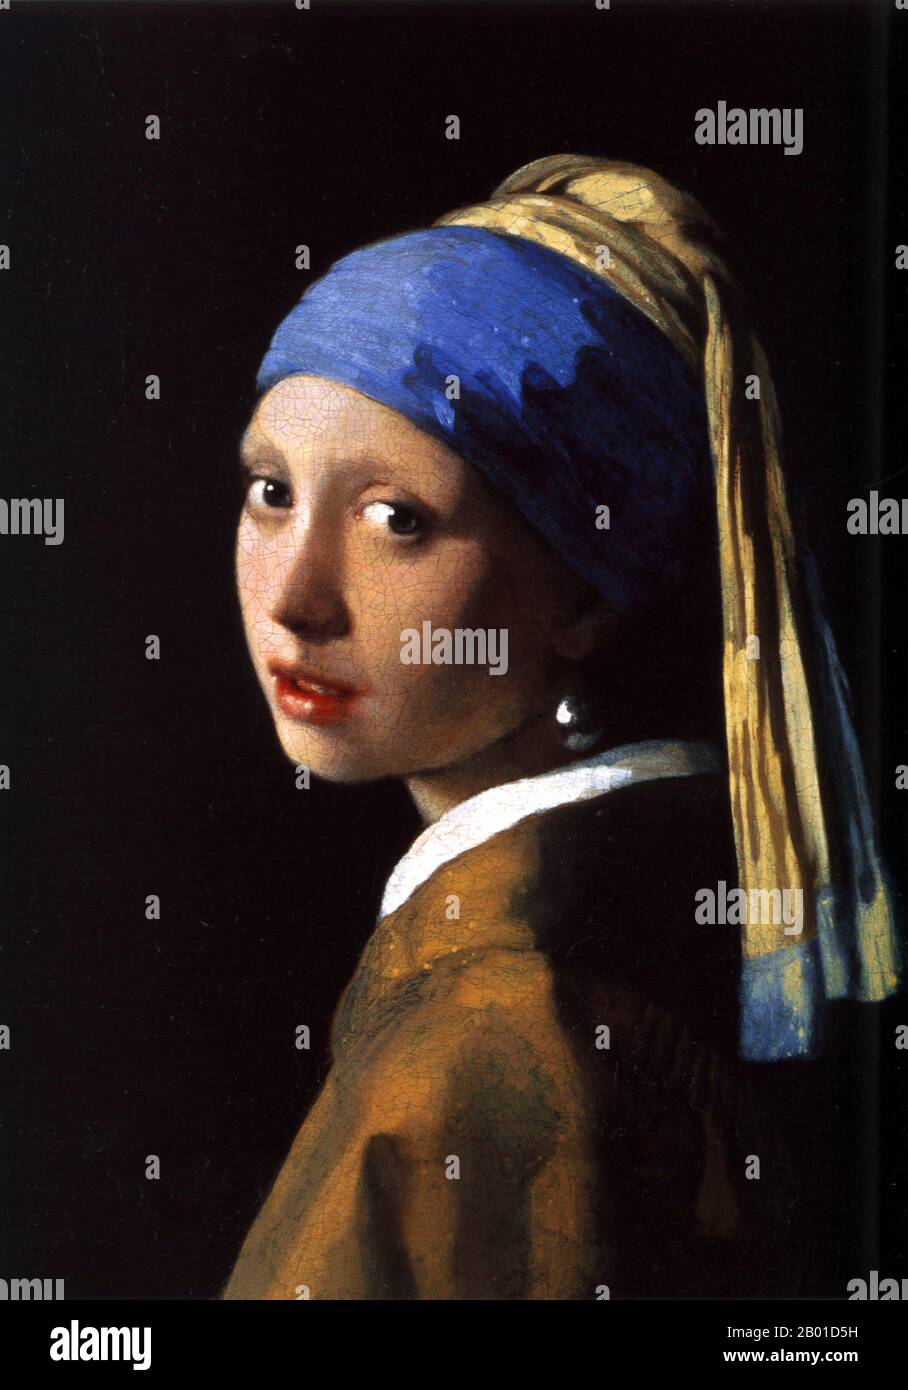 Netherlands: 'Girl with a Pearl Earring'. Oil on canvas painting by Johannes Vermeer (31 October 1632 - 15 December 1675), c. 1665.  The painting 'Girl with a Pearl Earring' (Dutch: Het Meisje met de Parel) is one of Dutch painter Johannes Vermeer's masterworks and as the name implies, uses a pearl earring for a focal point. Today the painting is kept in the Mauritshuis gallery in the Hague. It is sometimes referred to as 'the Mona Lisa of the North' or 'the Dutch Mona Lisa'. Stock Photo